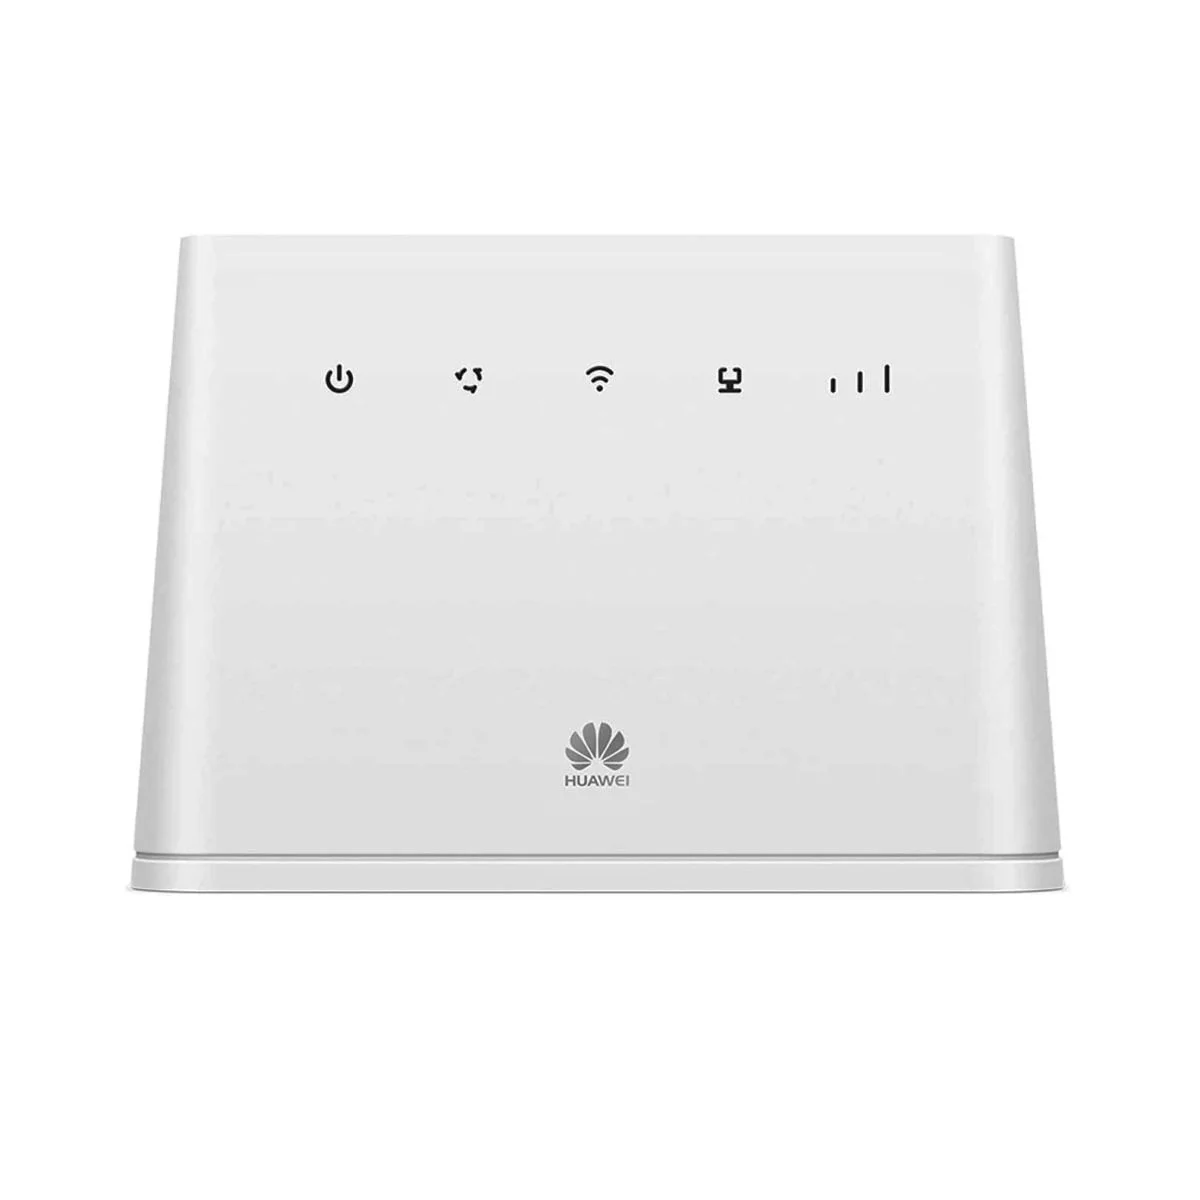 Huawei B311-300 Mbps Wireless Router